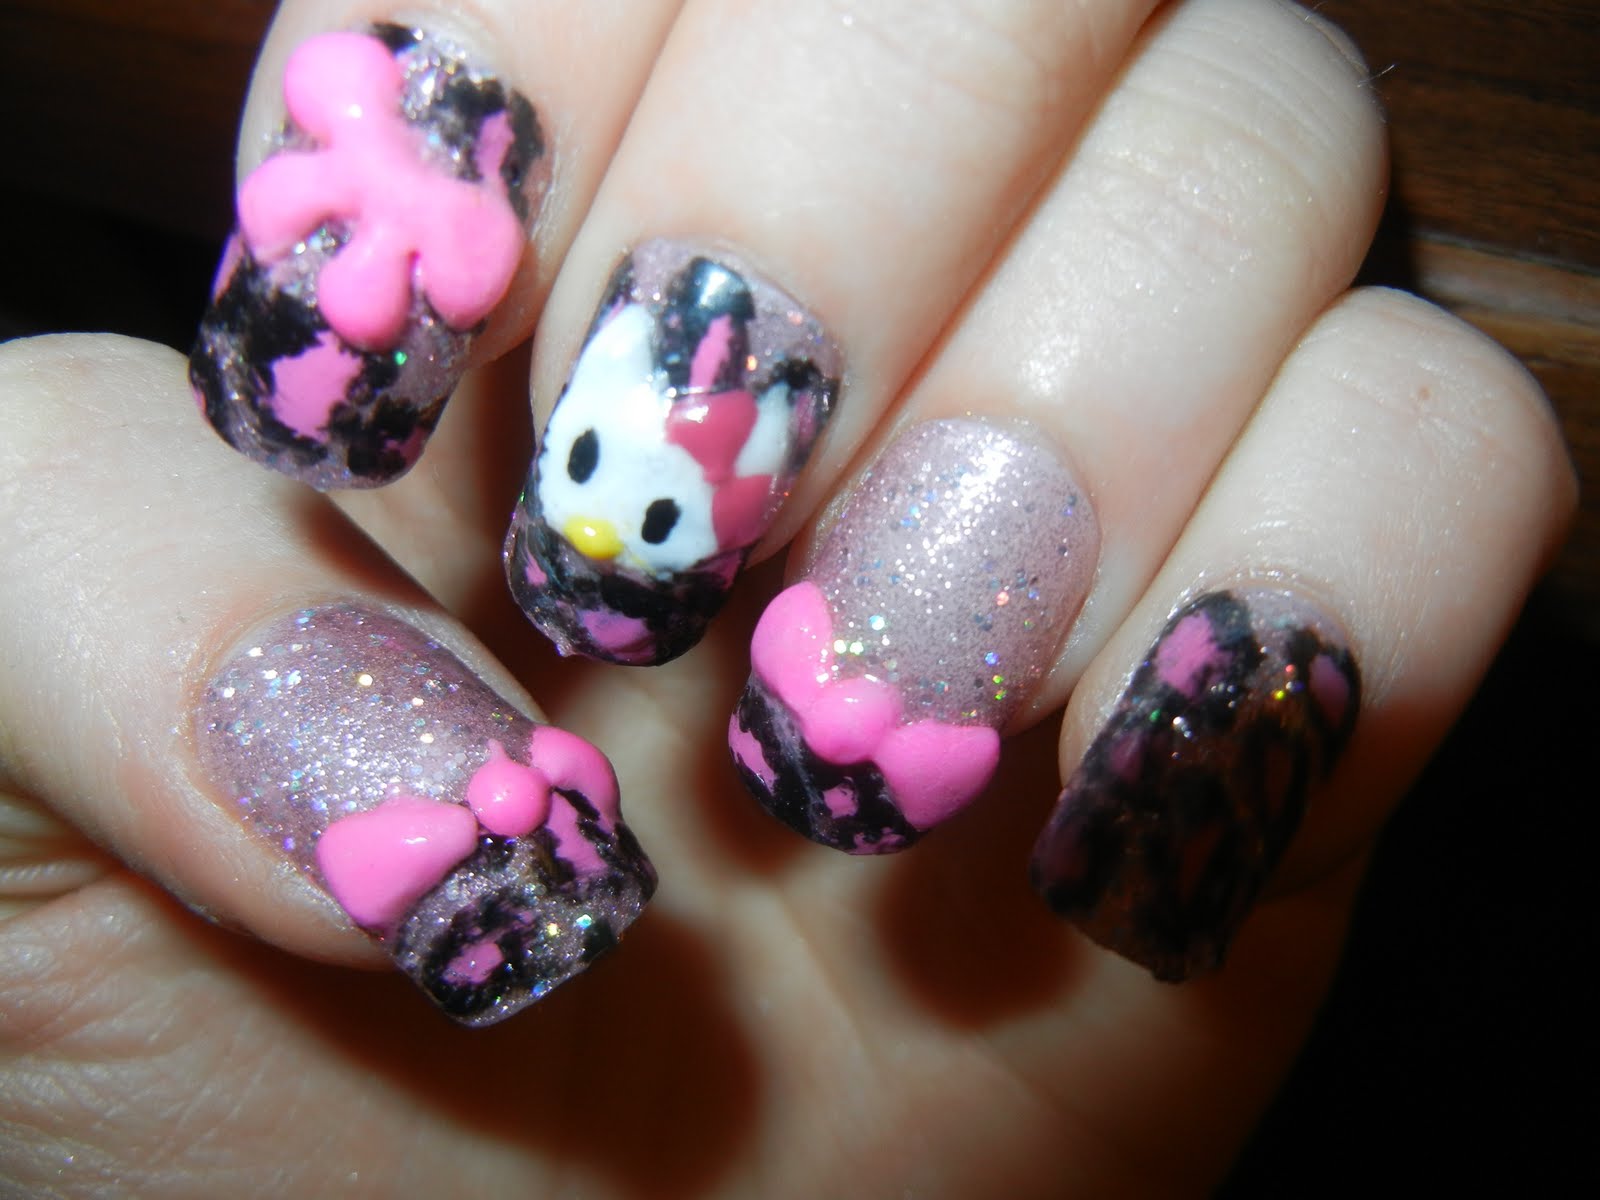 Nails By Leah: New Hello Kitty Nails! 3D bows and hello kitty face 